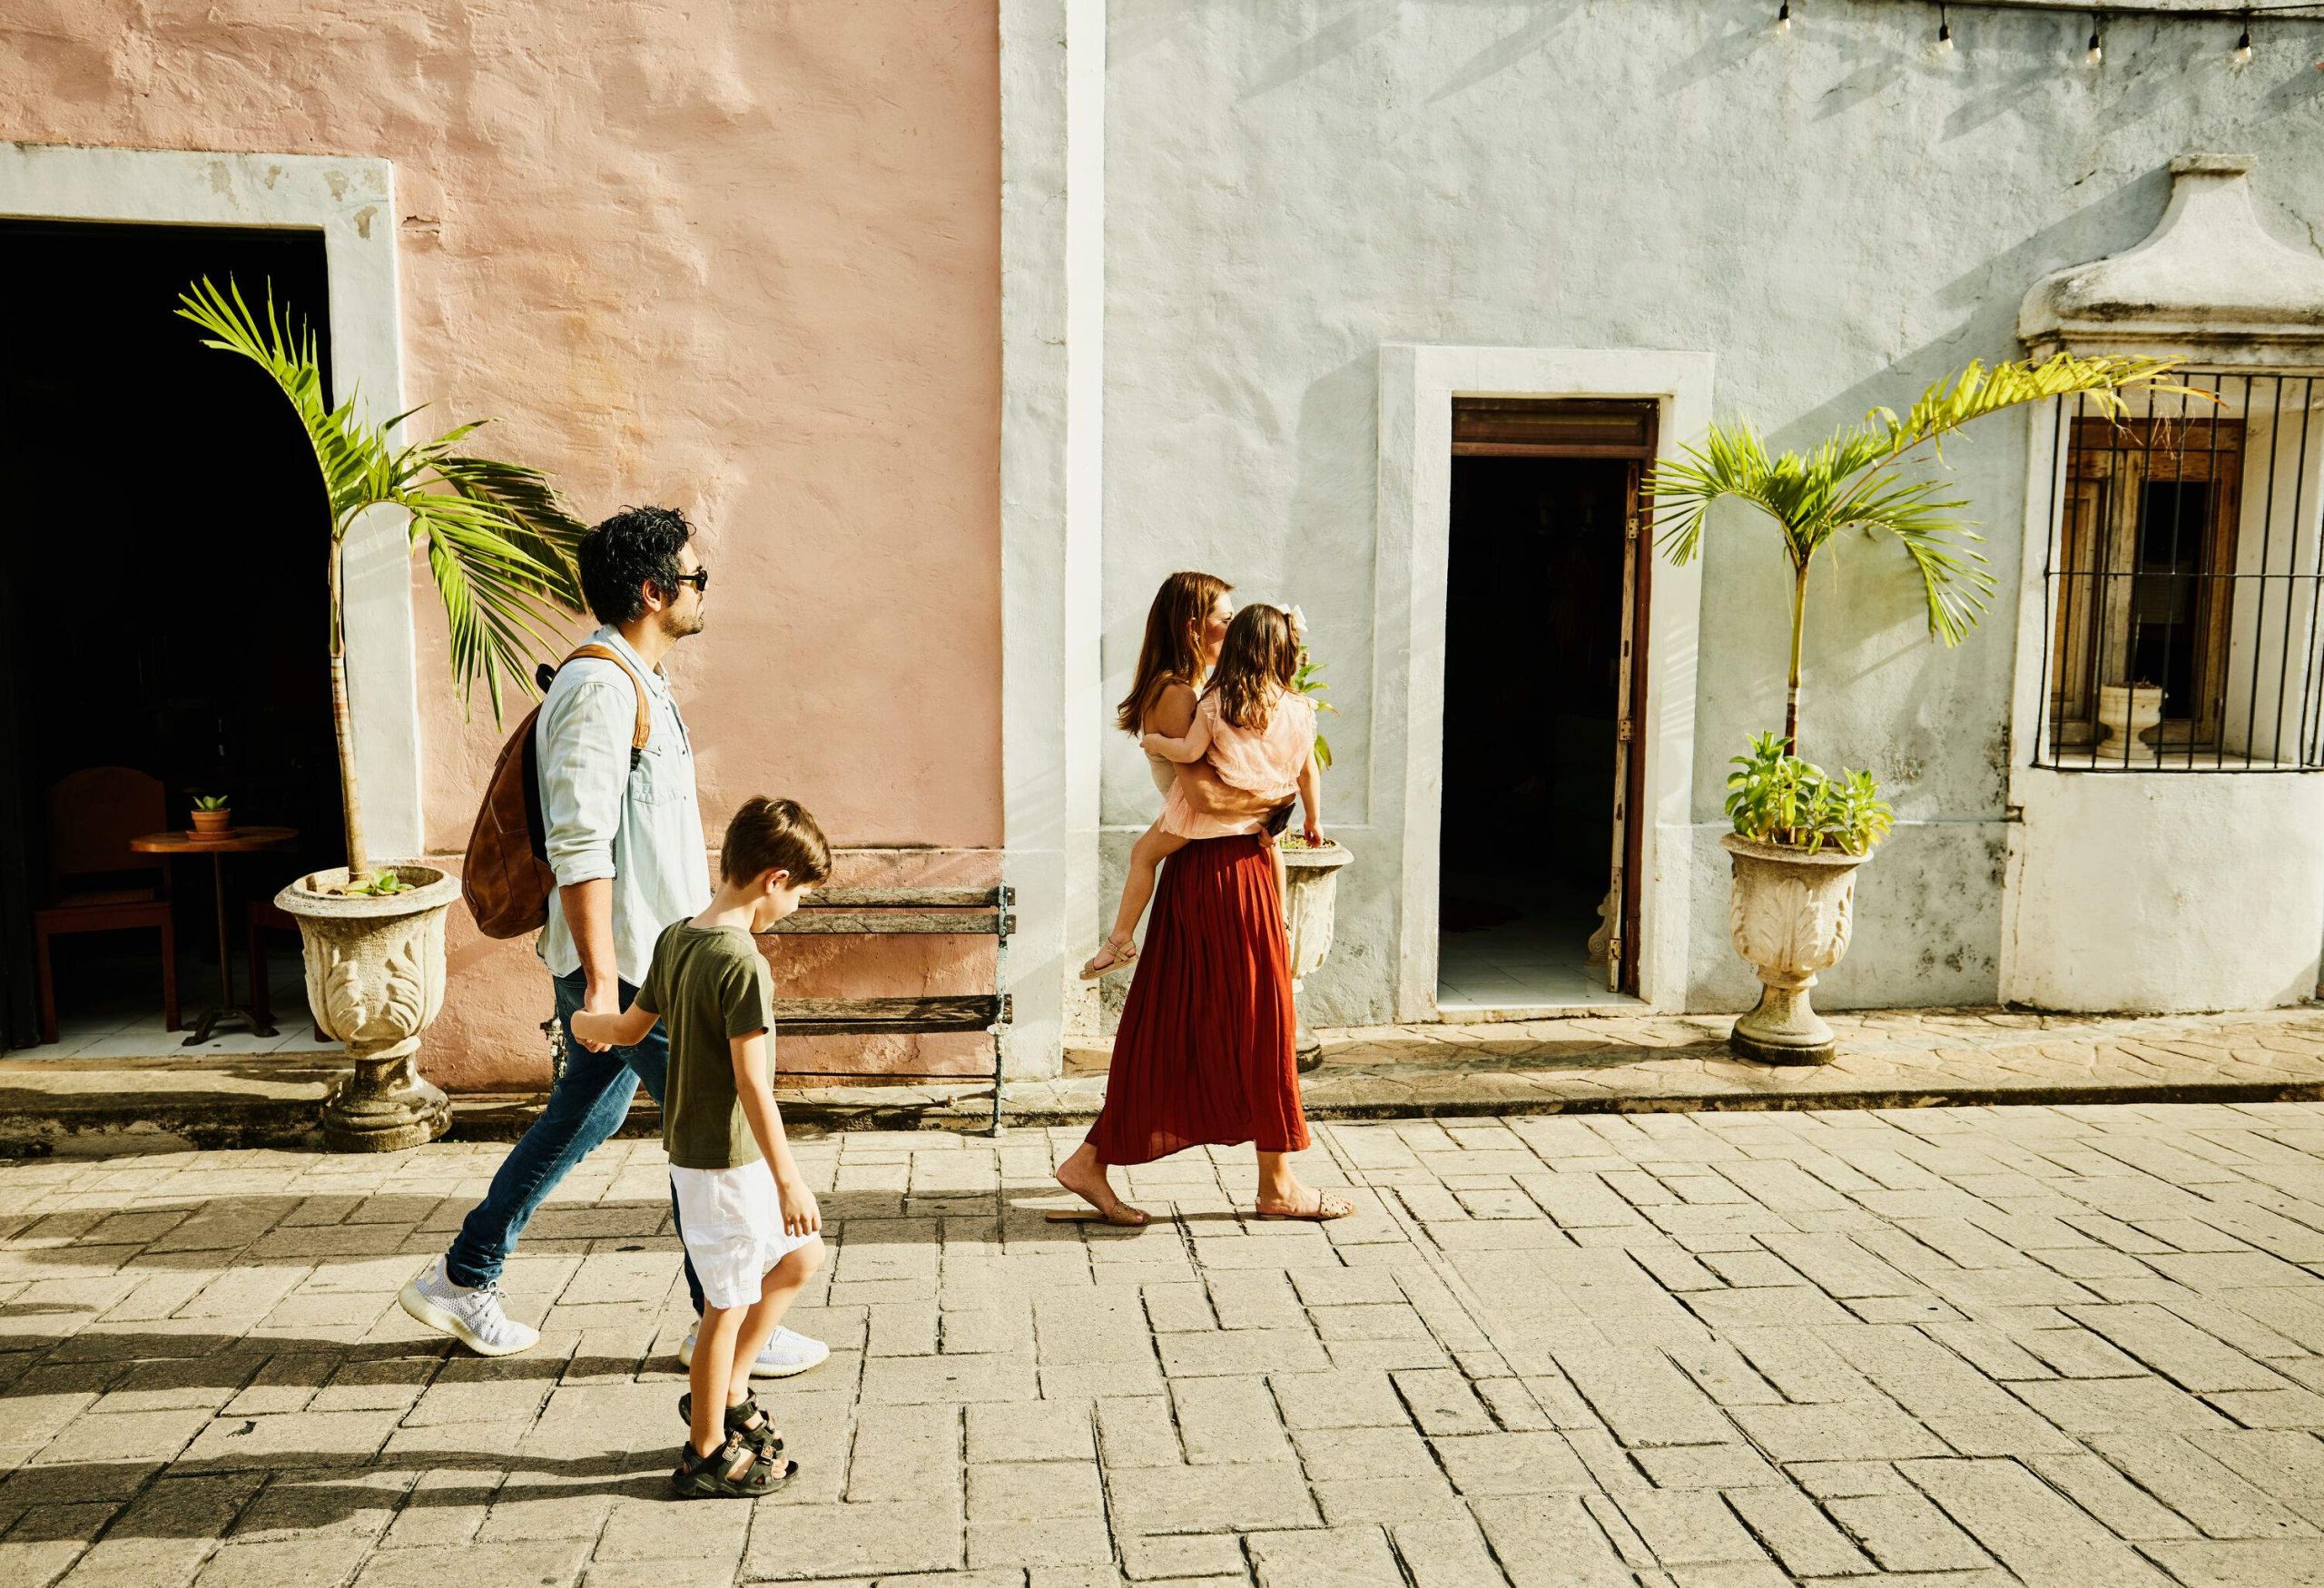 A four-person family strolls by a door on a residential street.